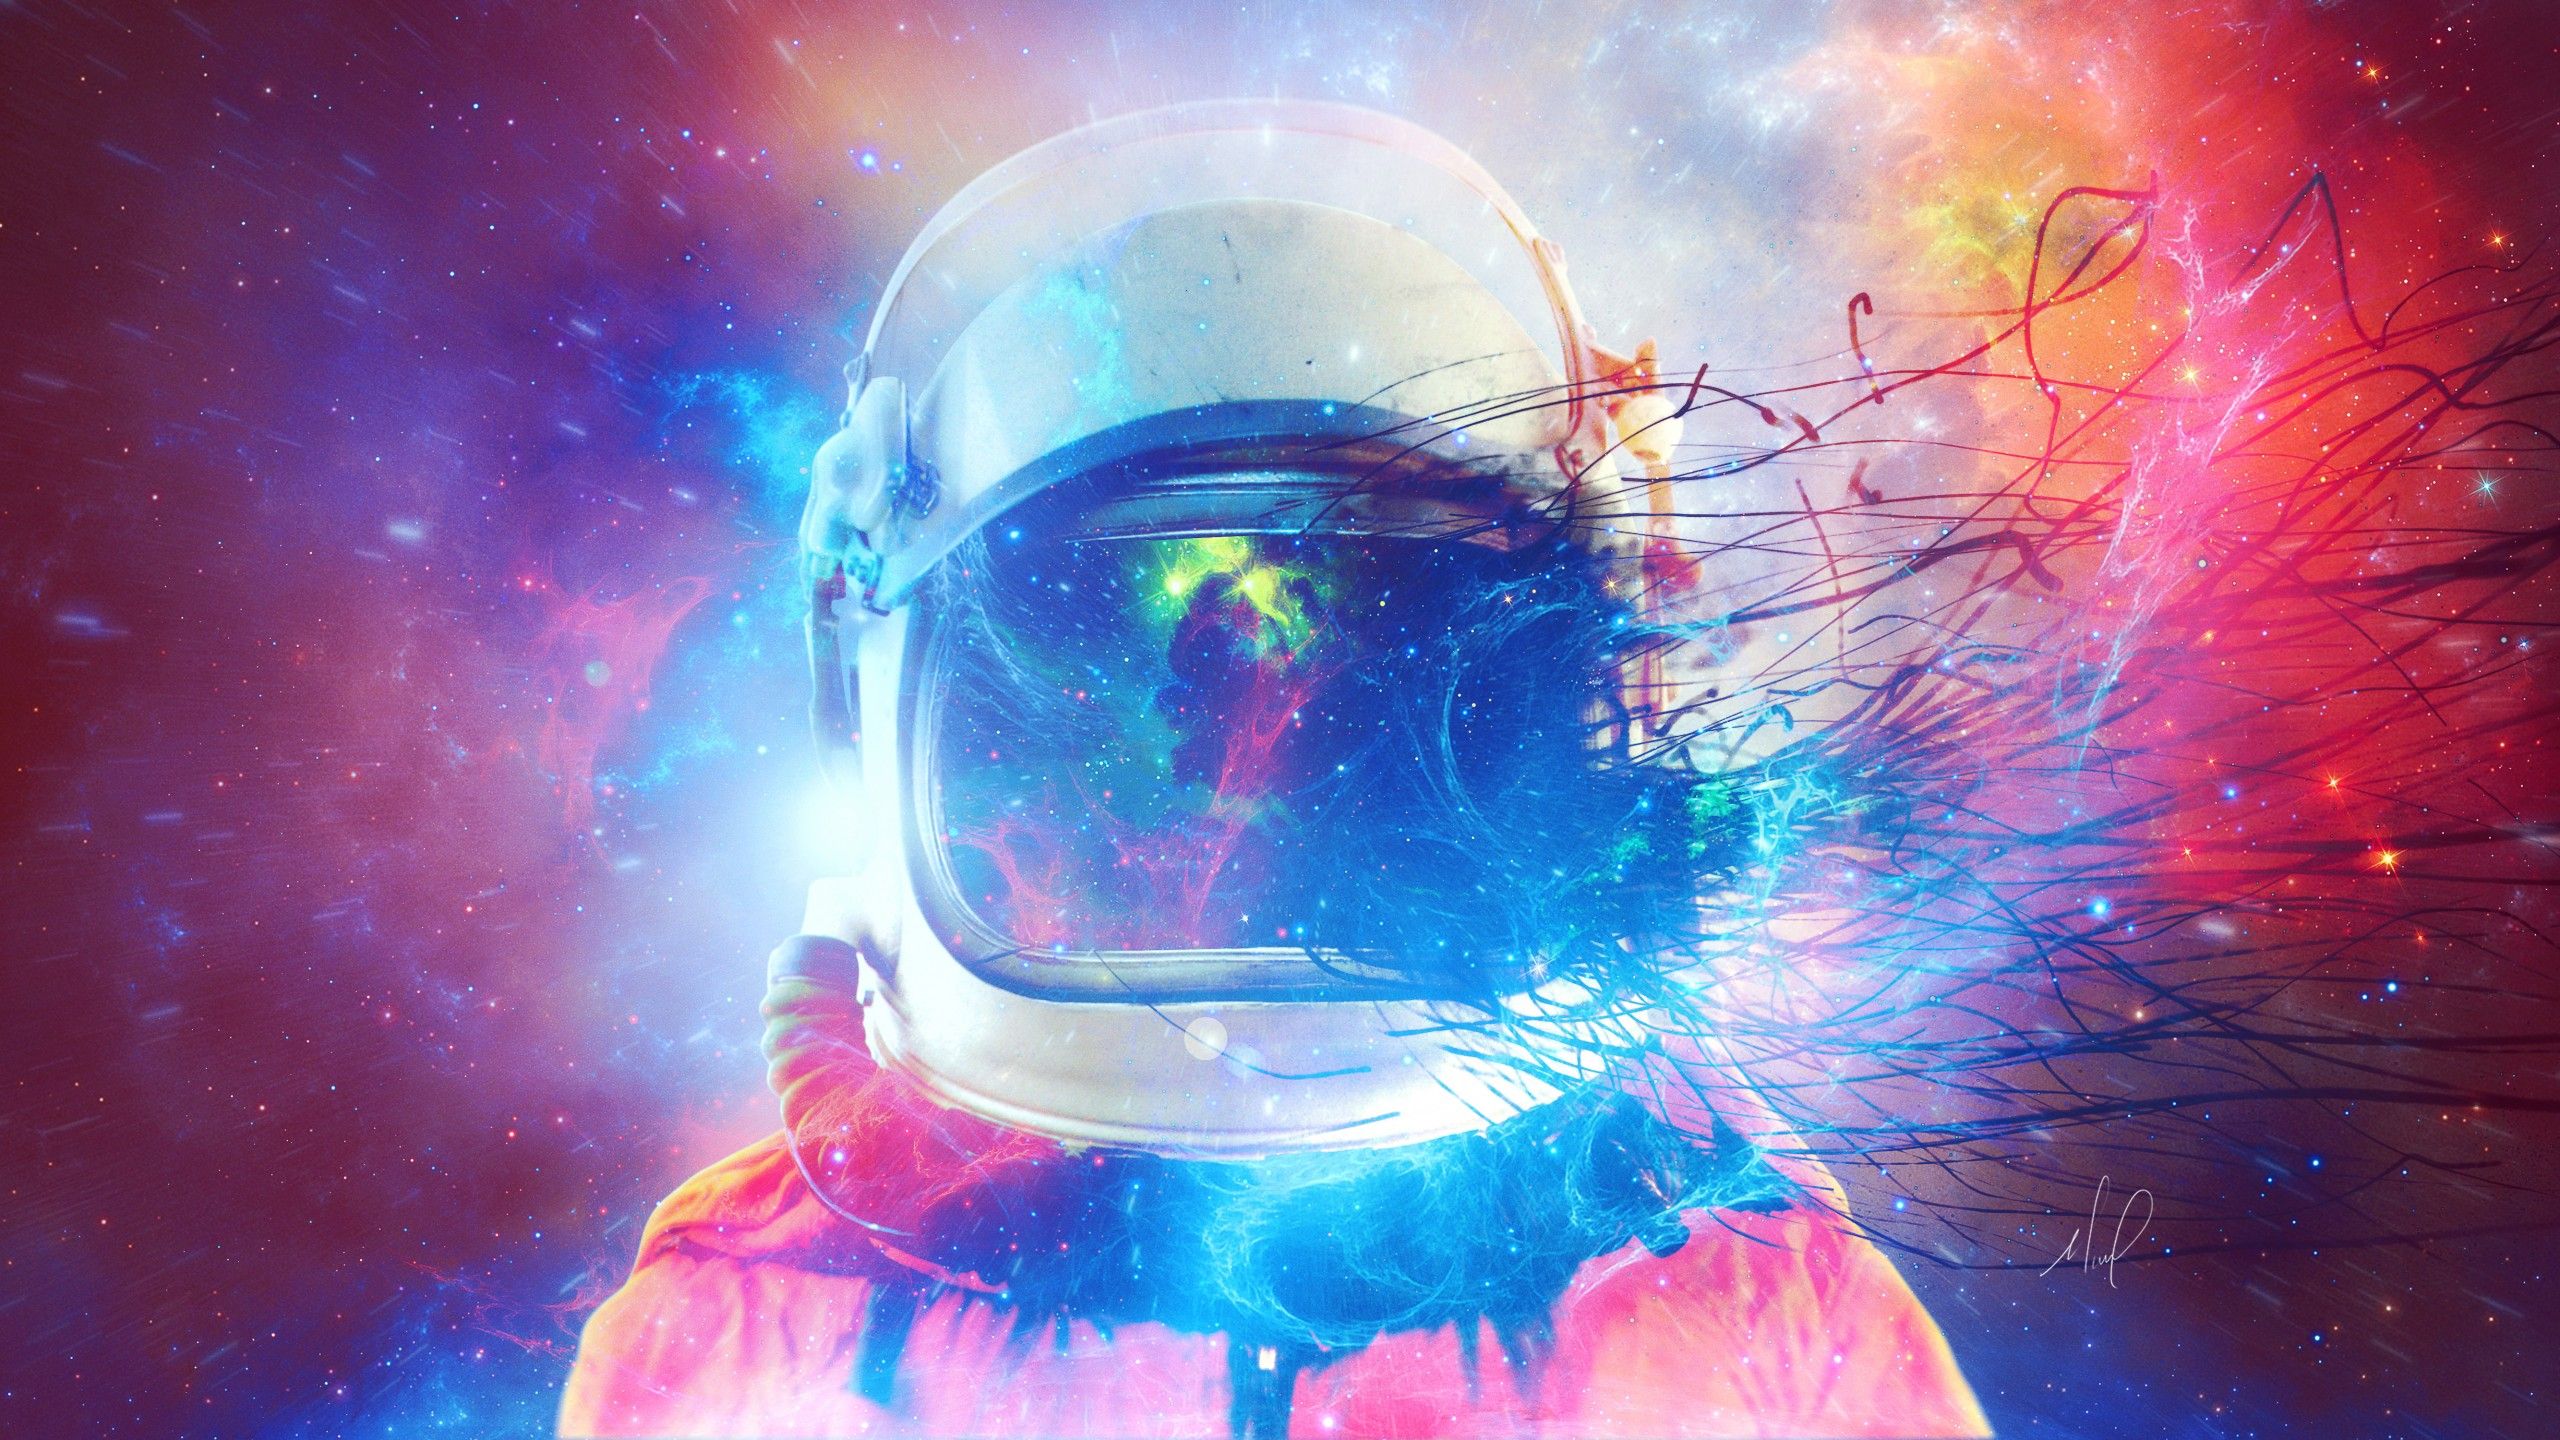 Wallpaper Astronaut, HD, 5K, Creative Graphics,. Wallpaper for iPhone, Android, Mobile and Desktop